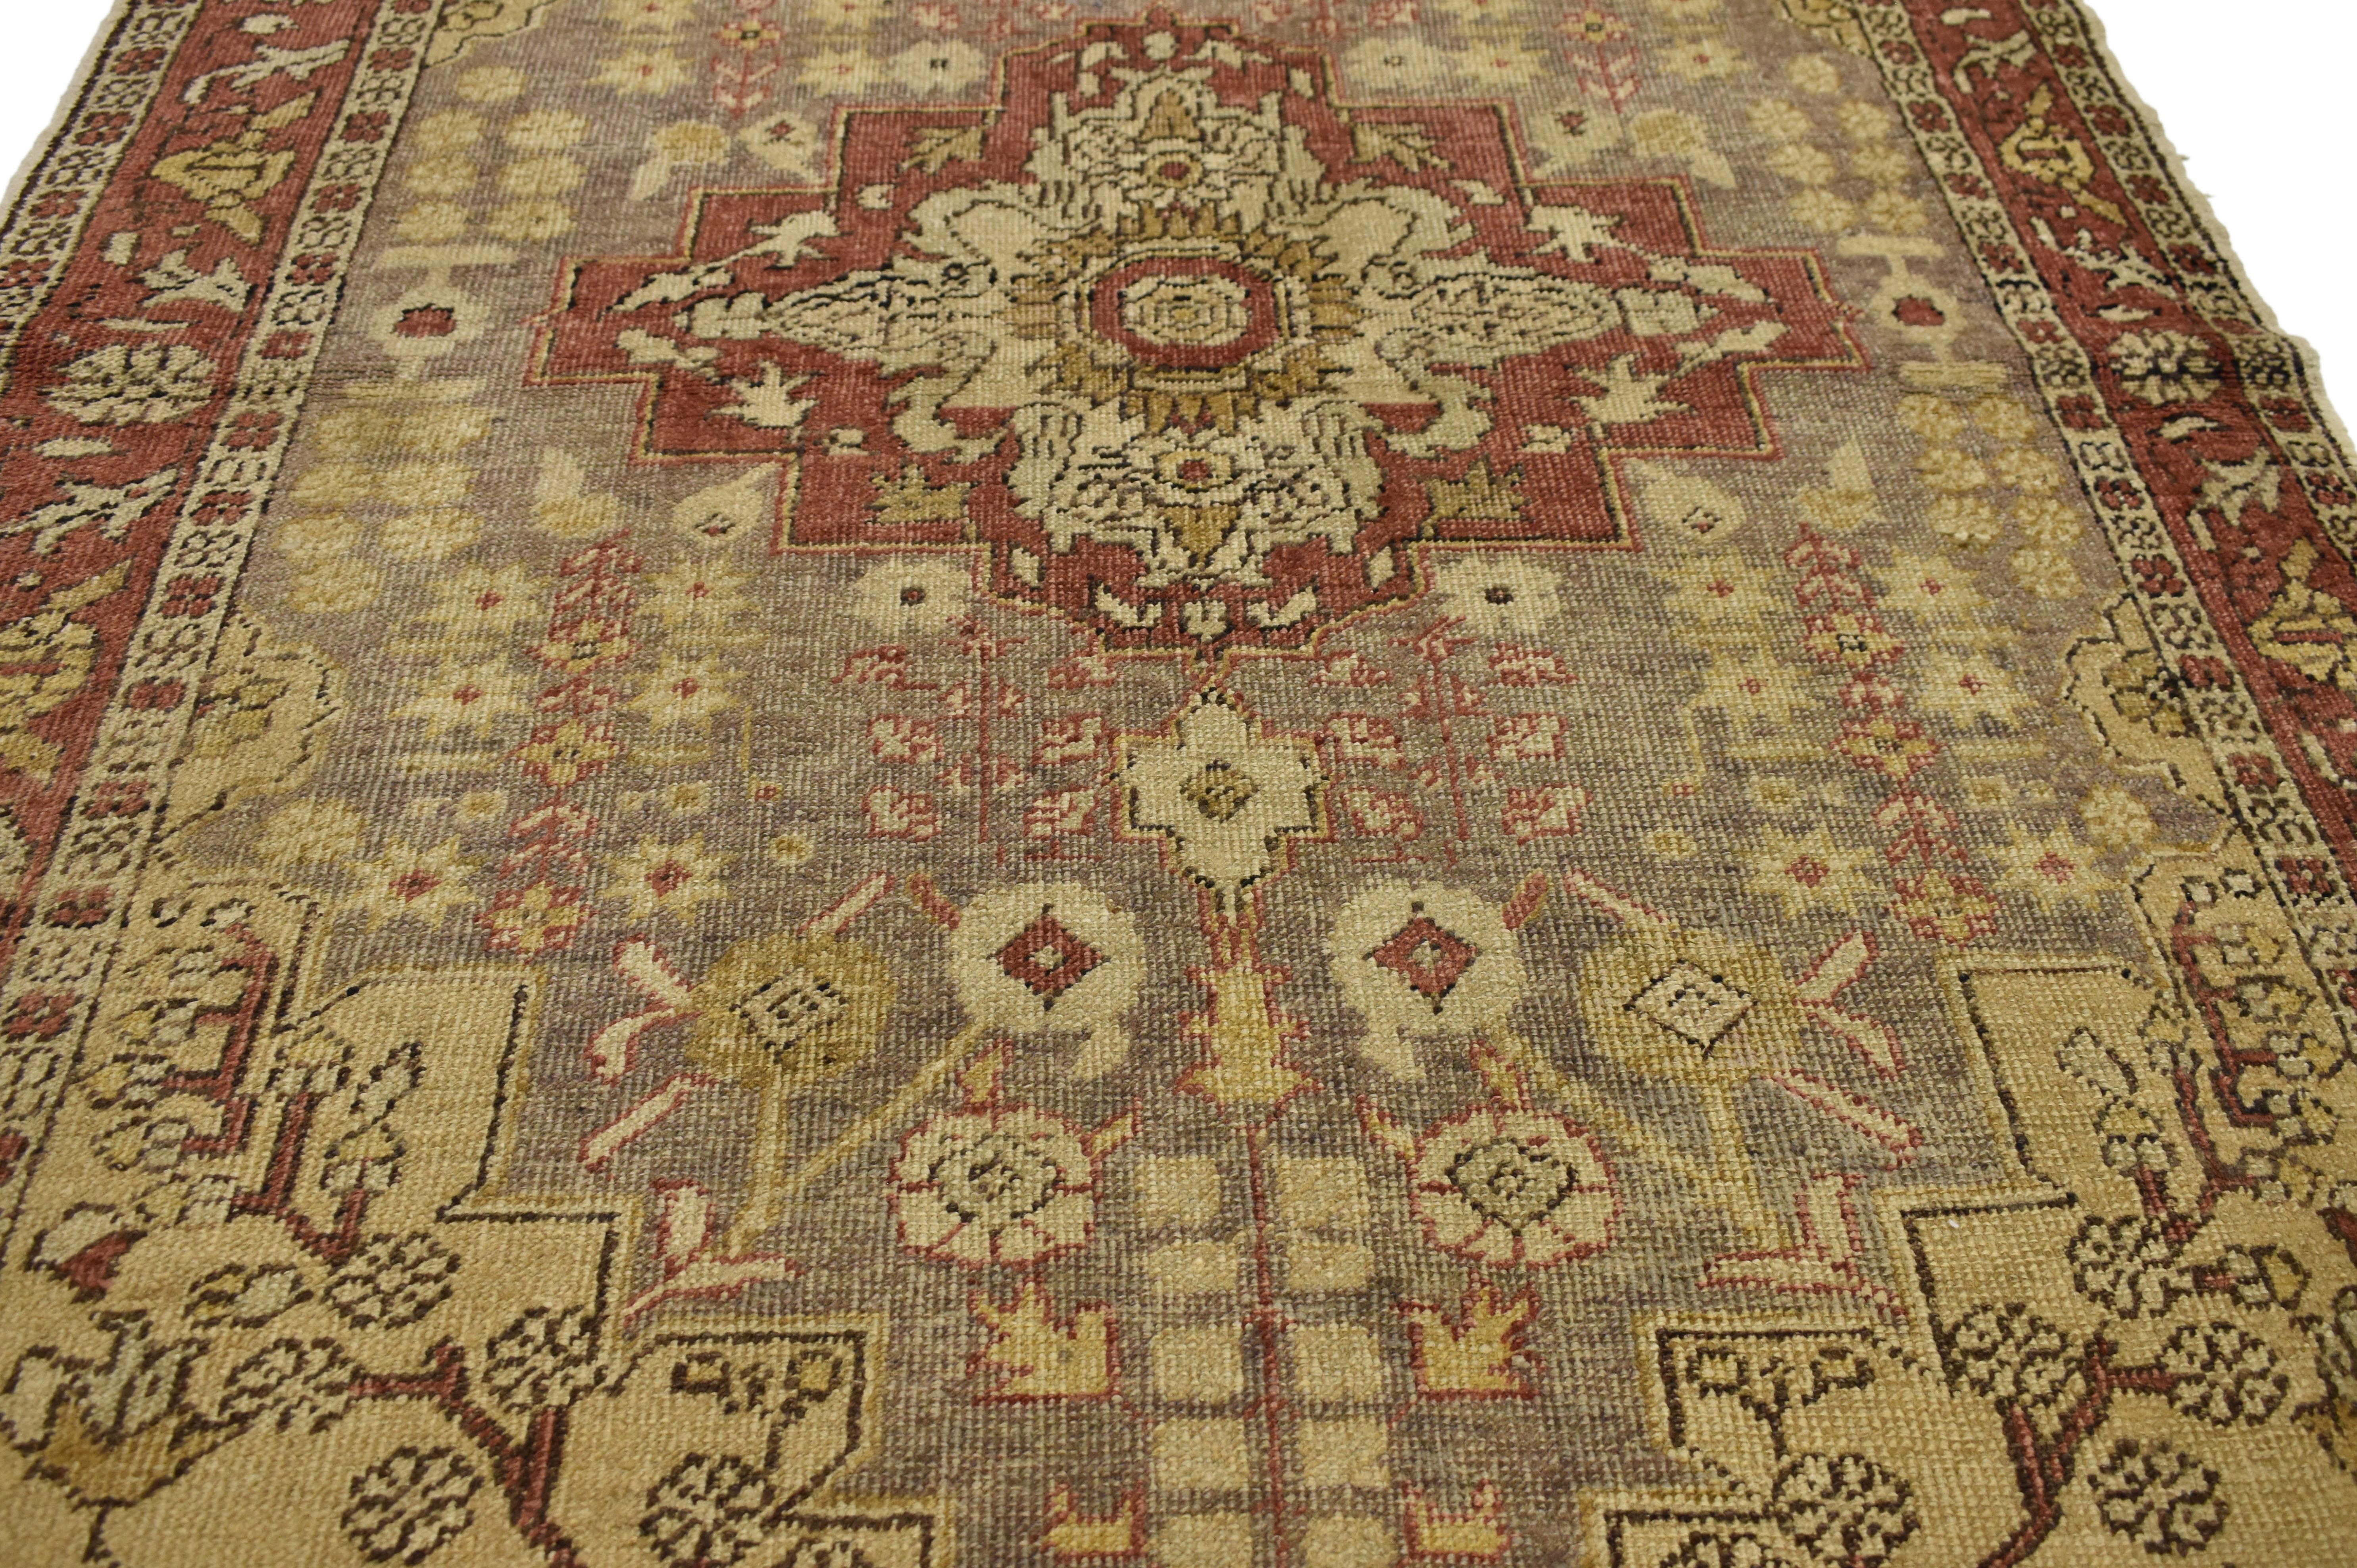 73924, modern rustic style vintage Turkish Sivas accent rug, entry or foyer rug. This hand-knotted wool vintage Turkish Sivas accent rug features a modern rustic style. Immersed in Anatolian history and time-softened colors, this vintage rustic